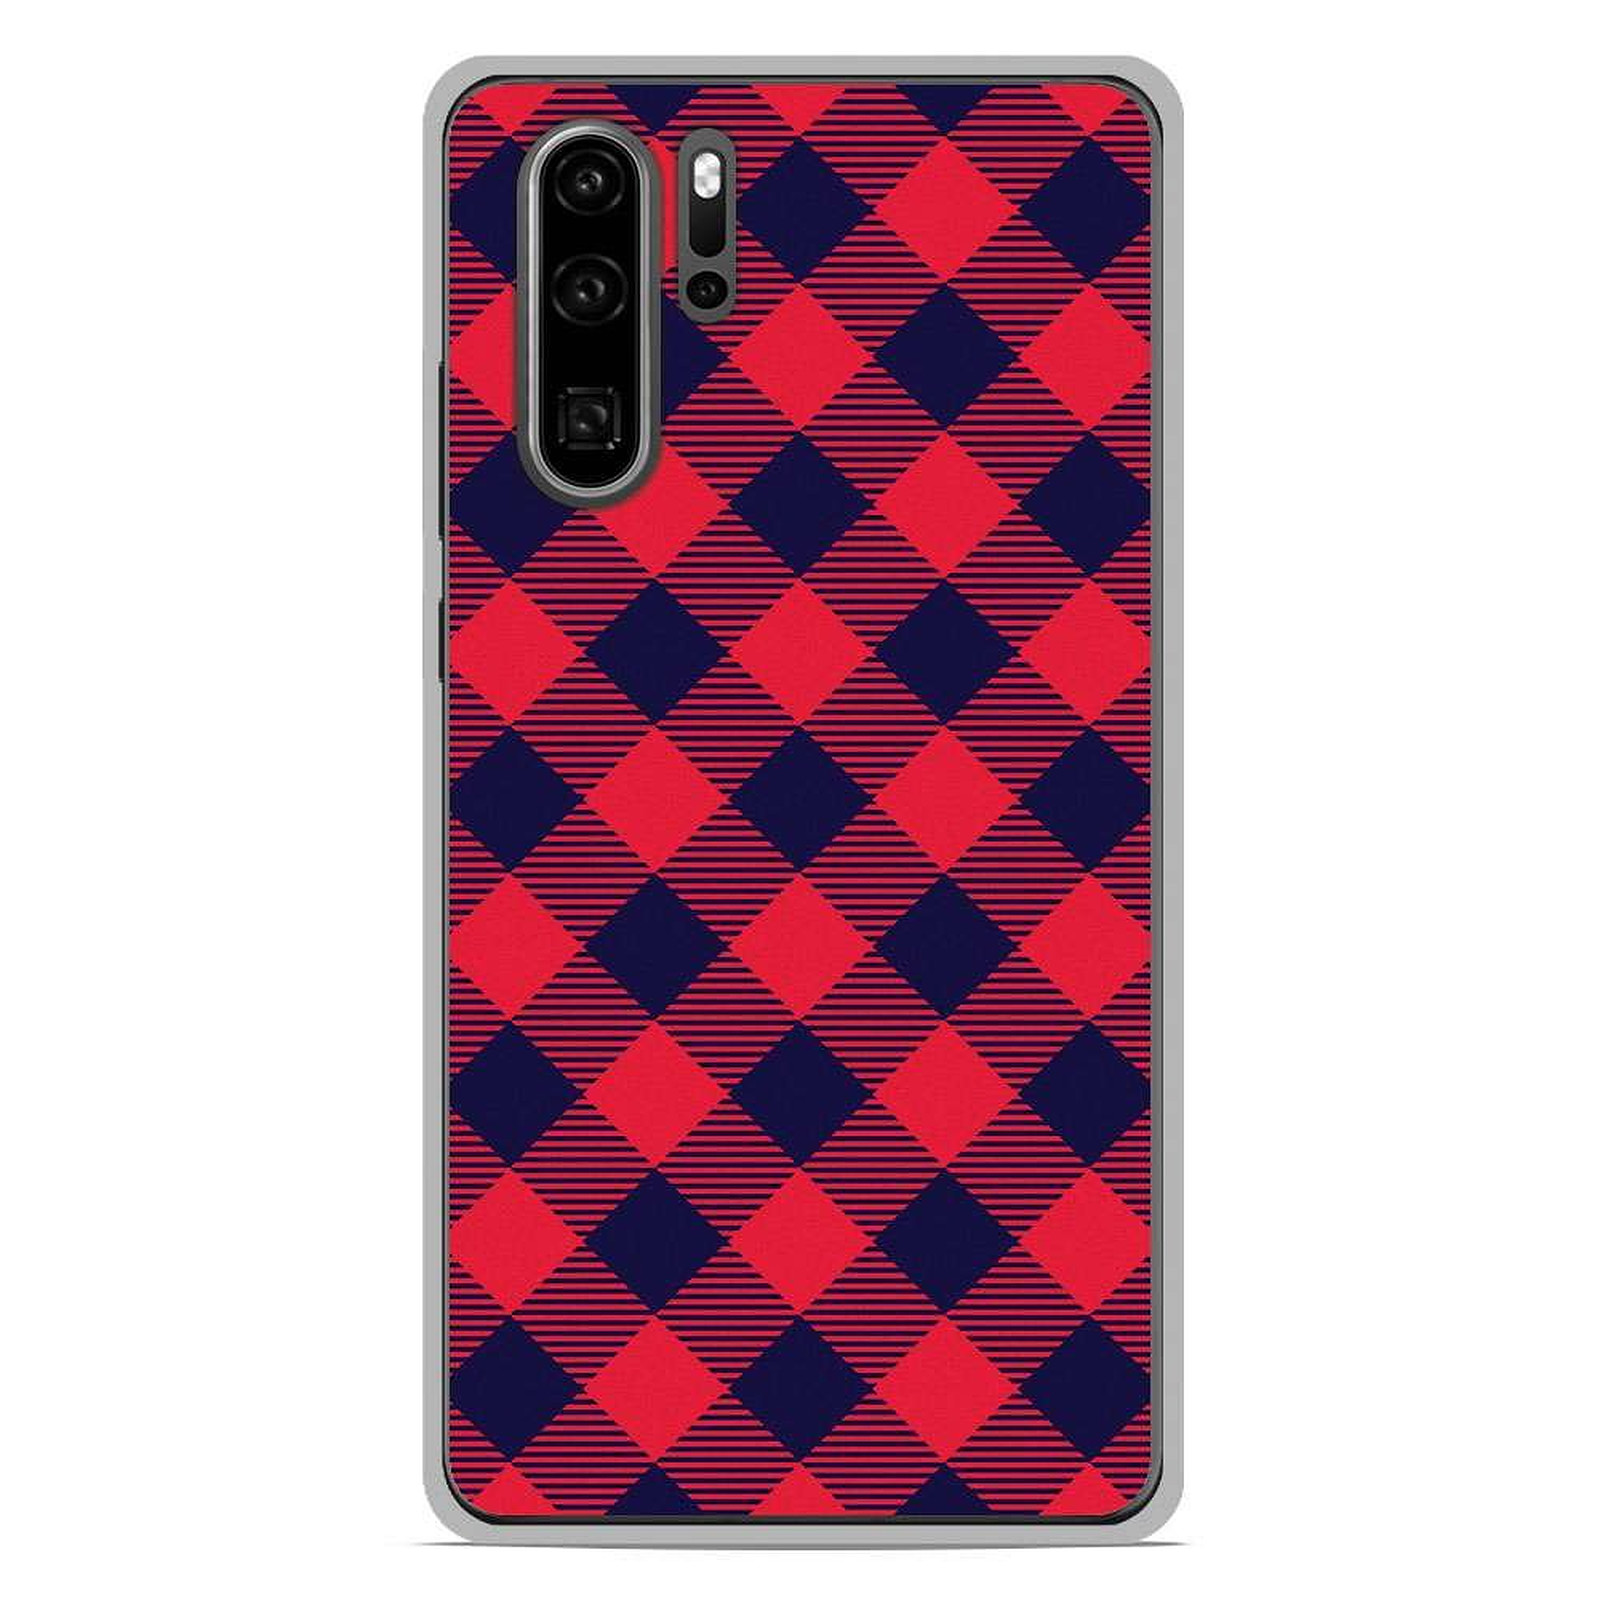 1001 Coques Coque silicone gel Huawei P30 Pro motif Tartan Rouge - Coque telephone 1001Coques